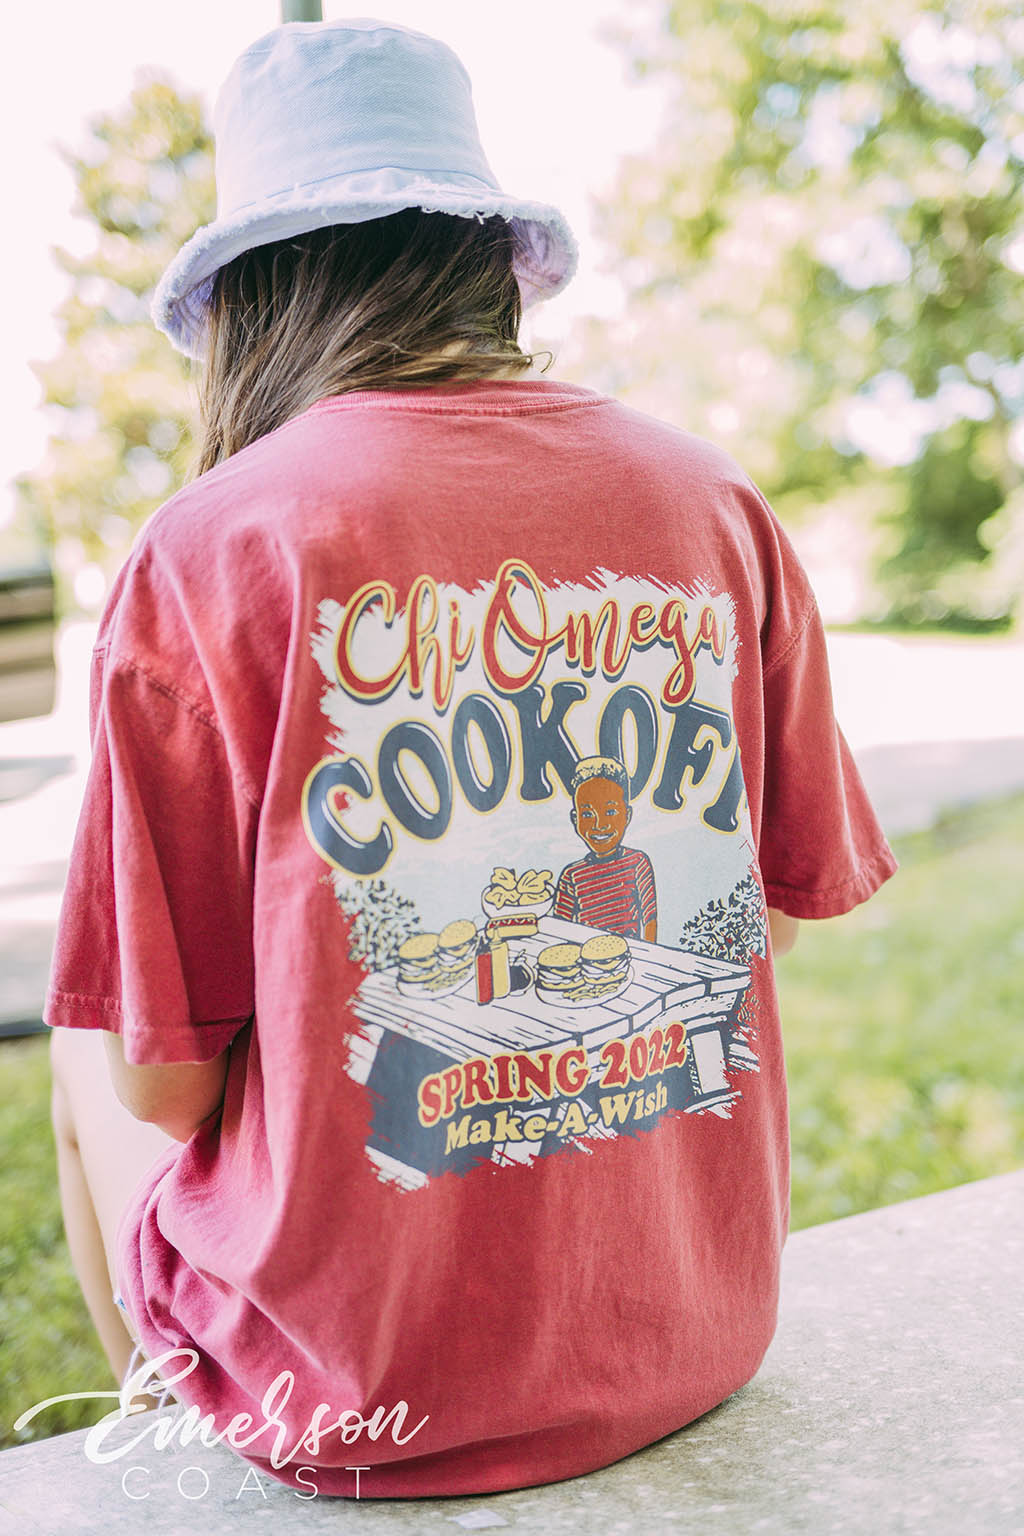 Chi Omega Philanthropy Cookoff Tee